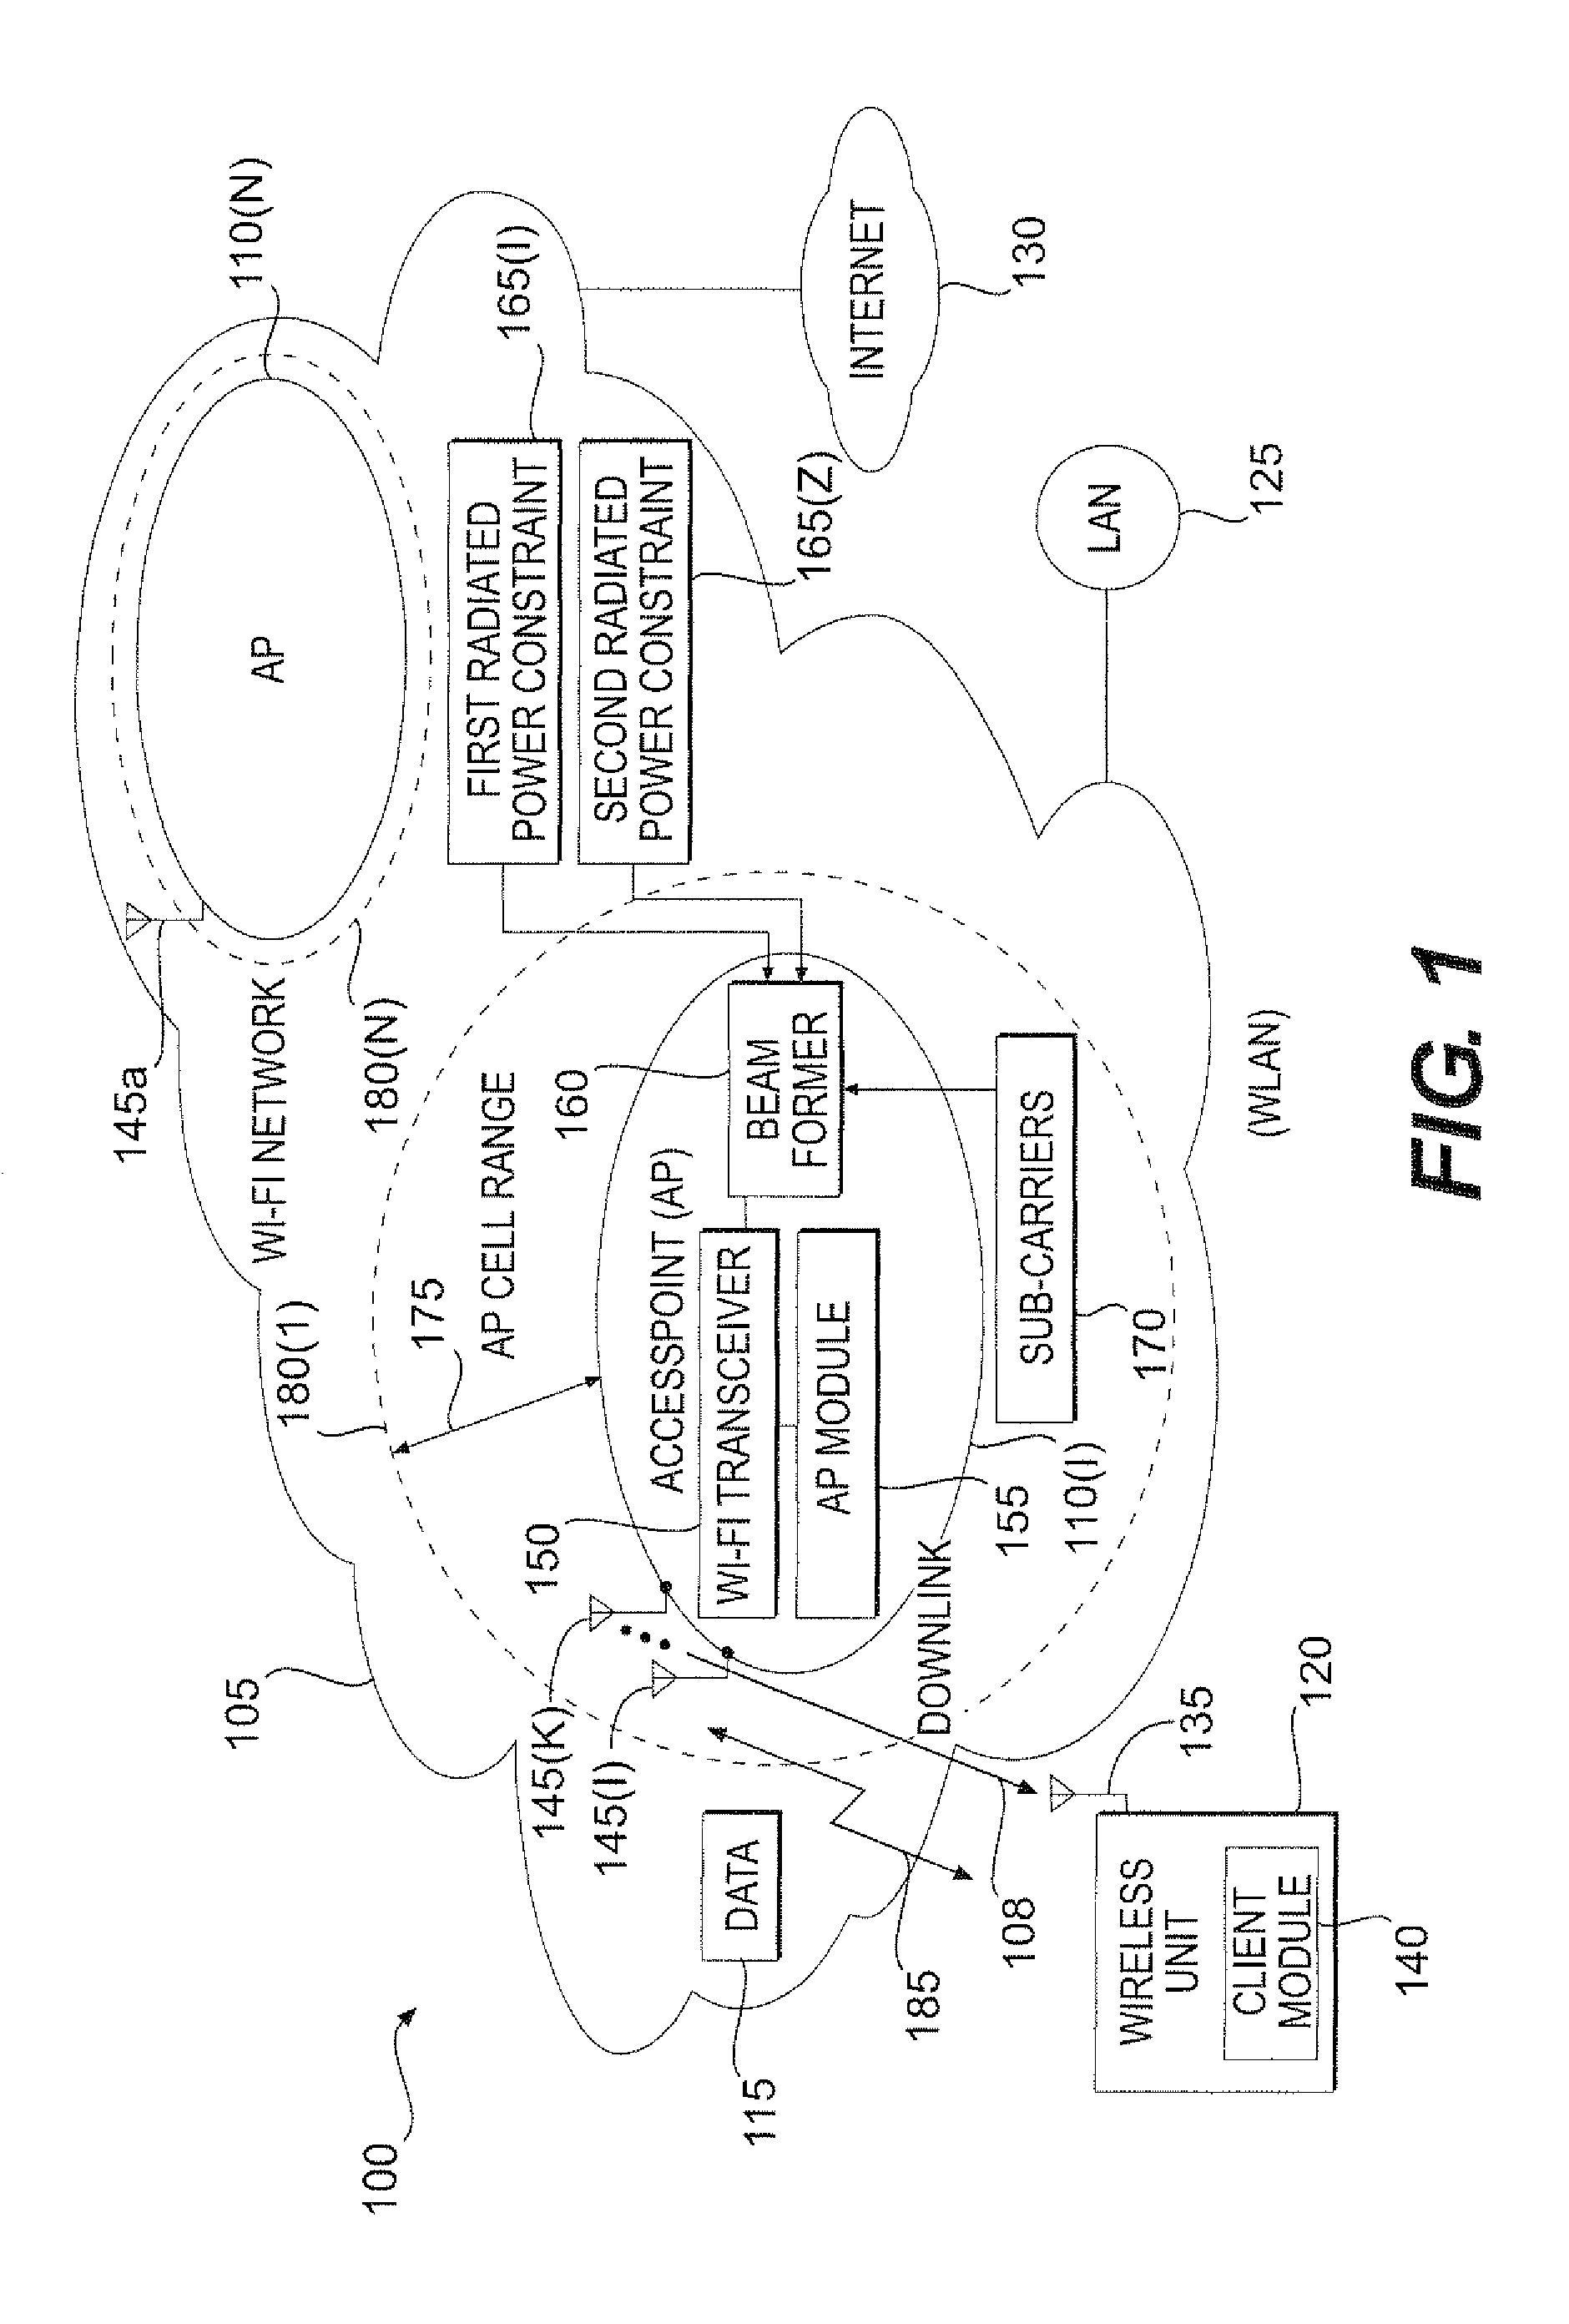 Increasing the range of access point cells for a given throughput in a downlink of a wireless local area network